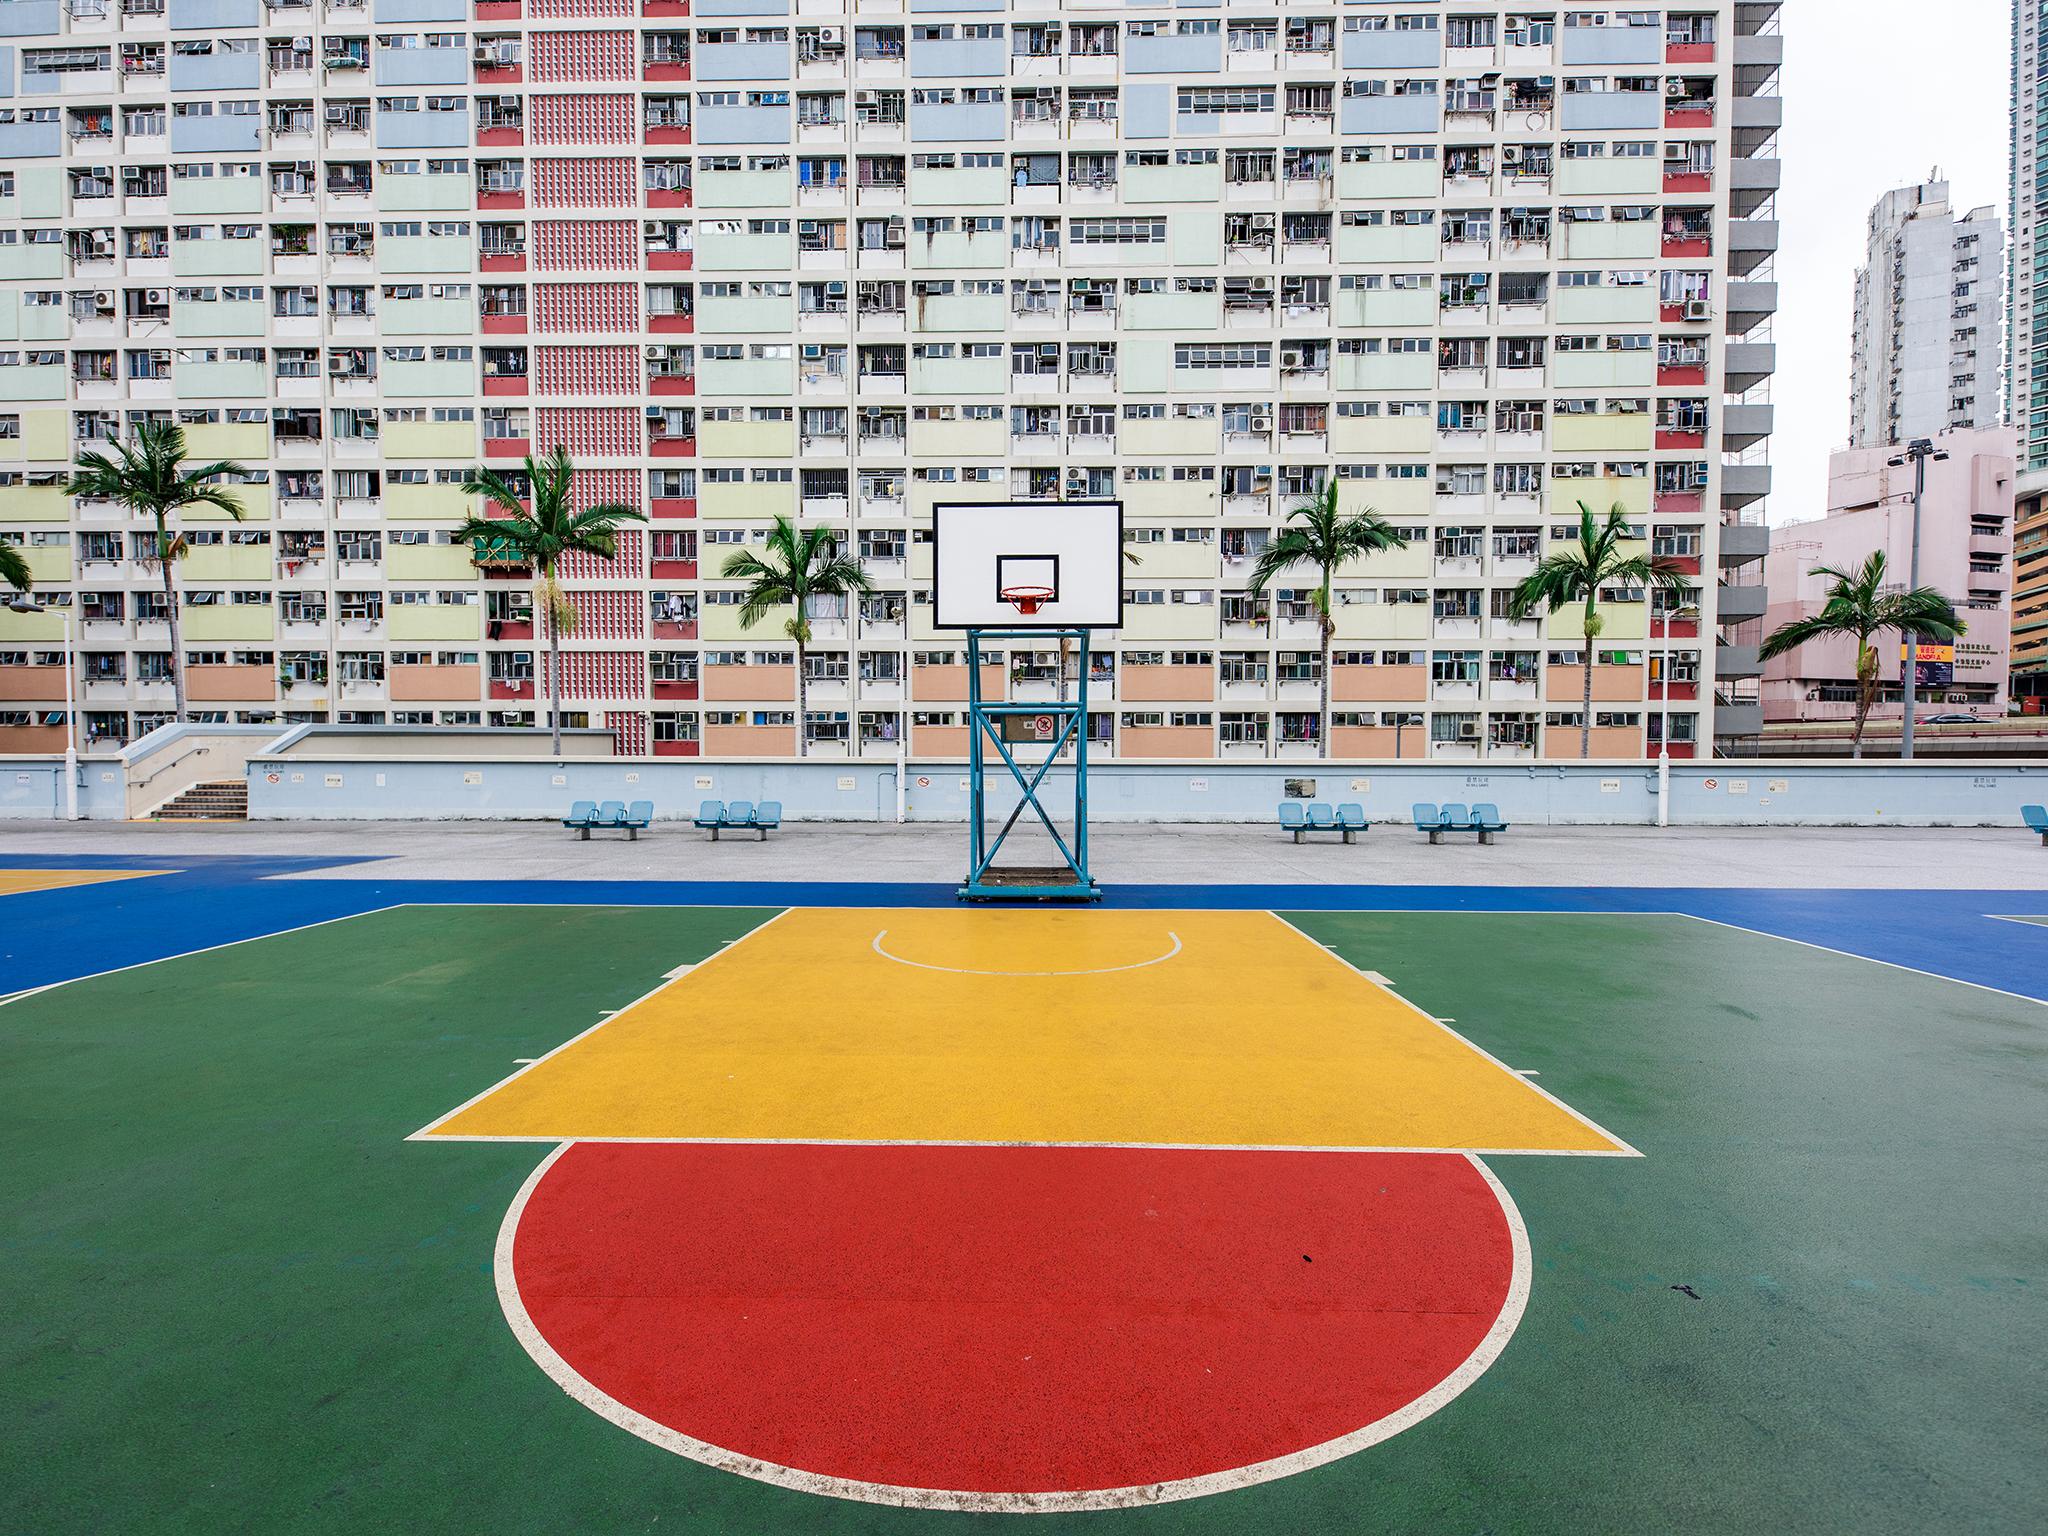 The basketball courts at Choi Hung – thankfully empty on this occasion